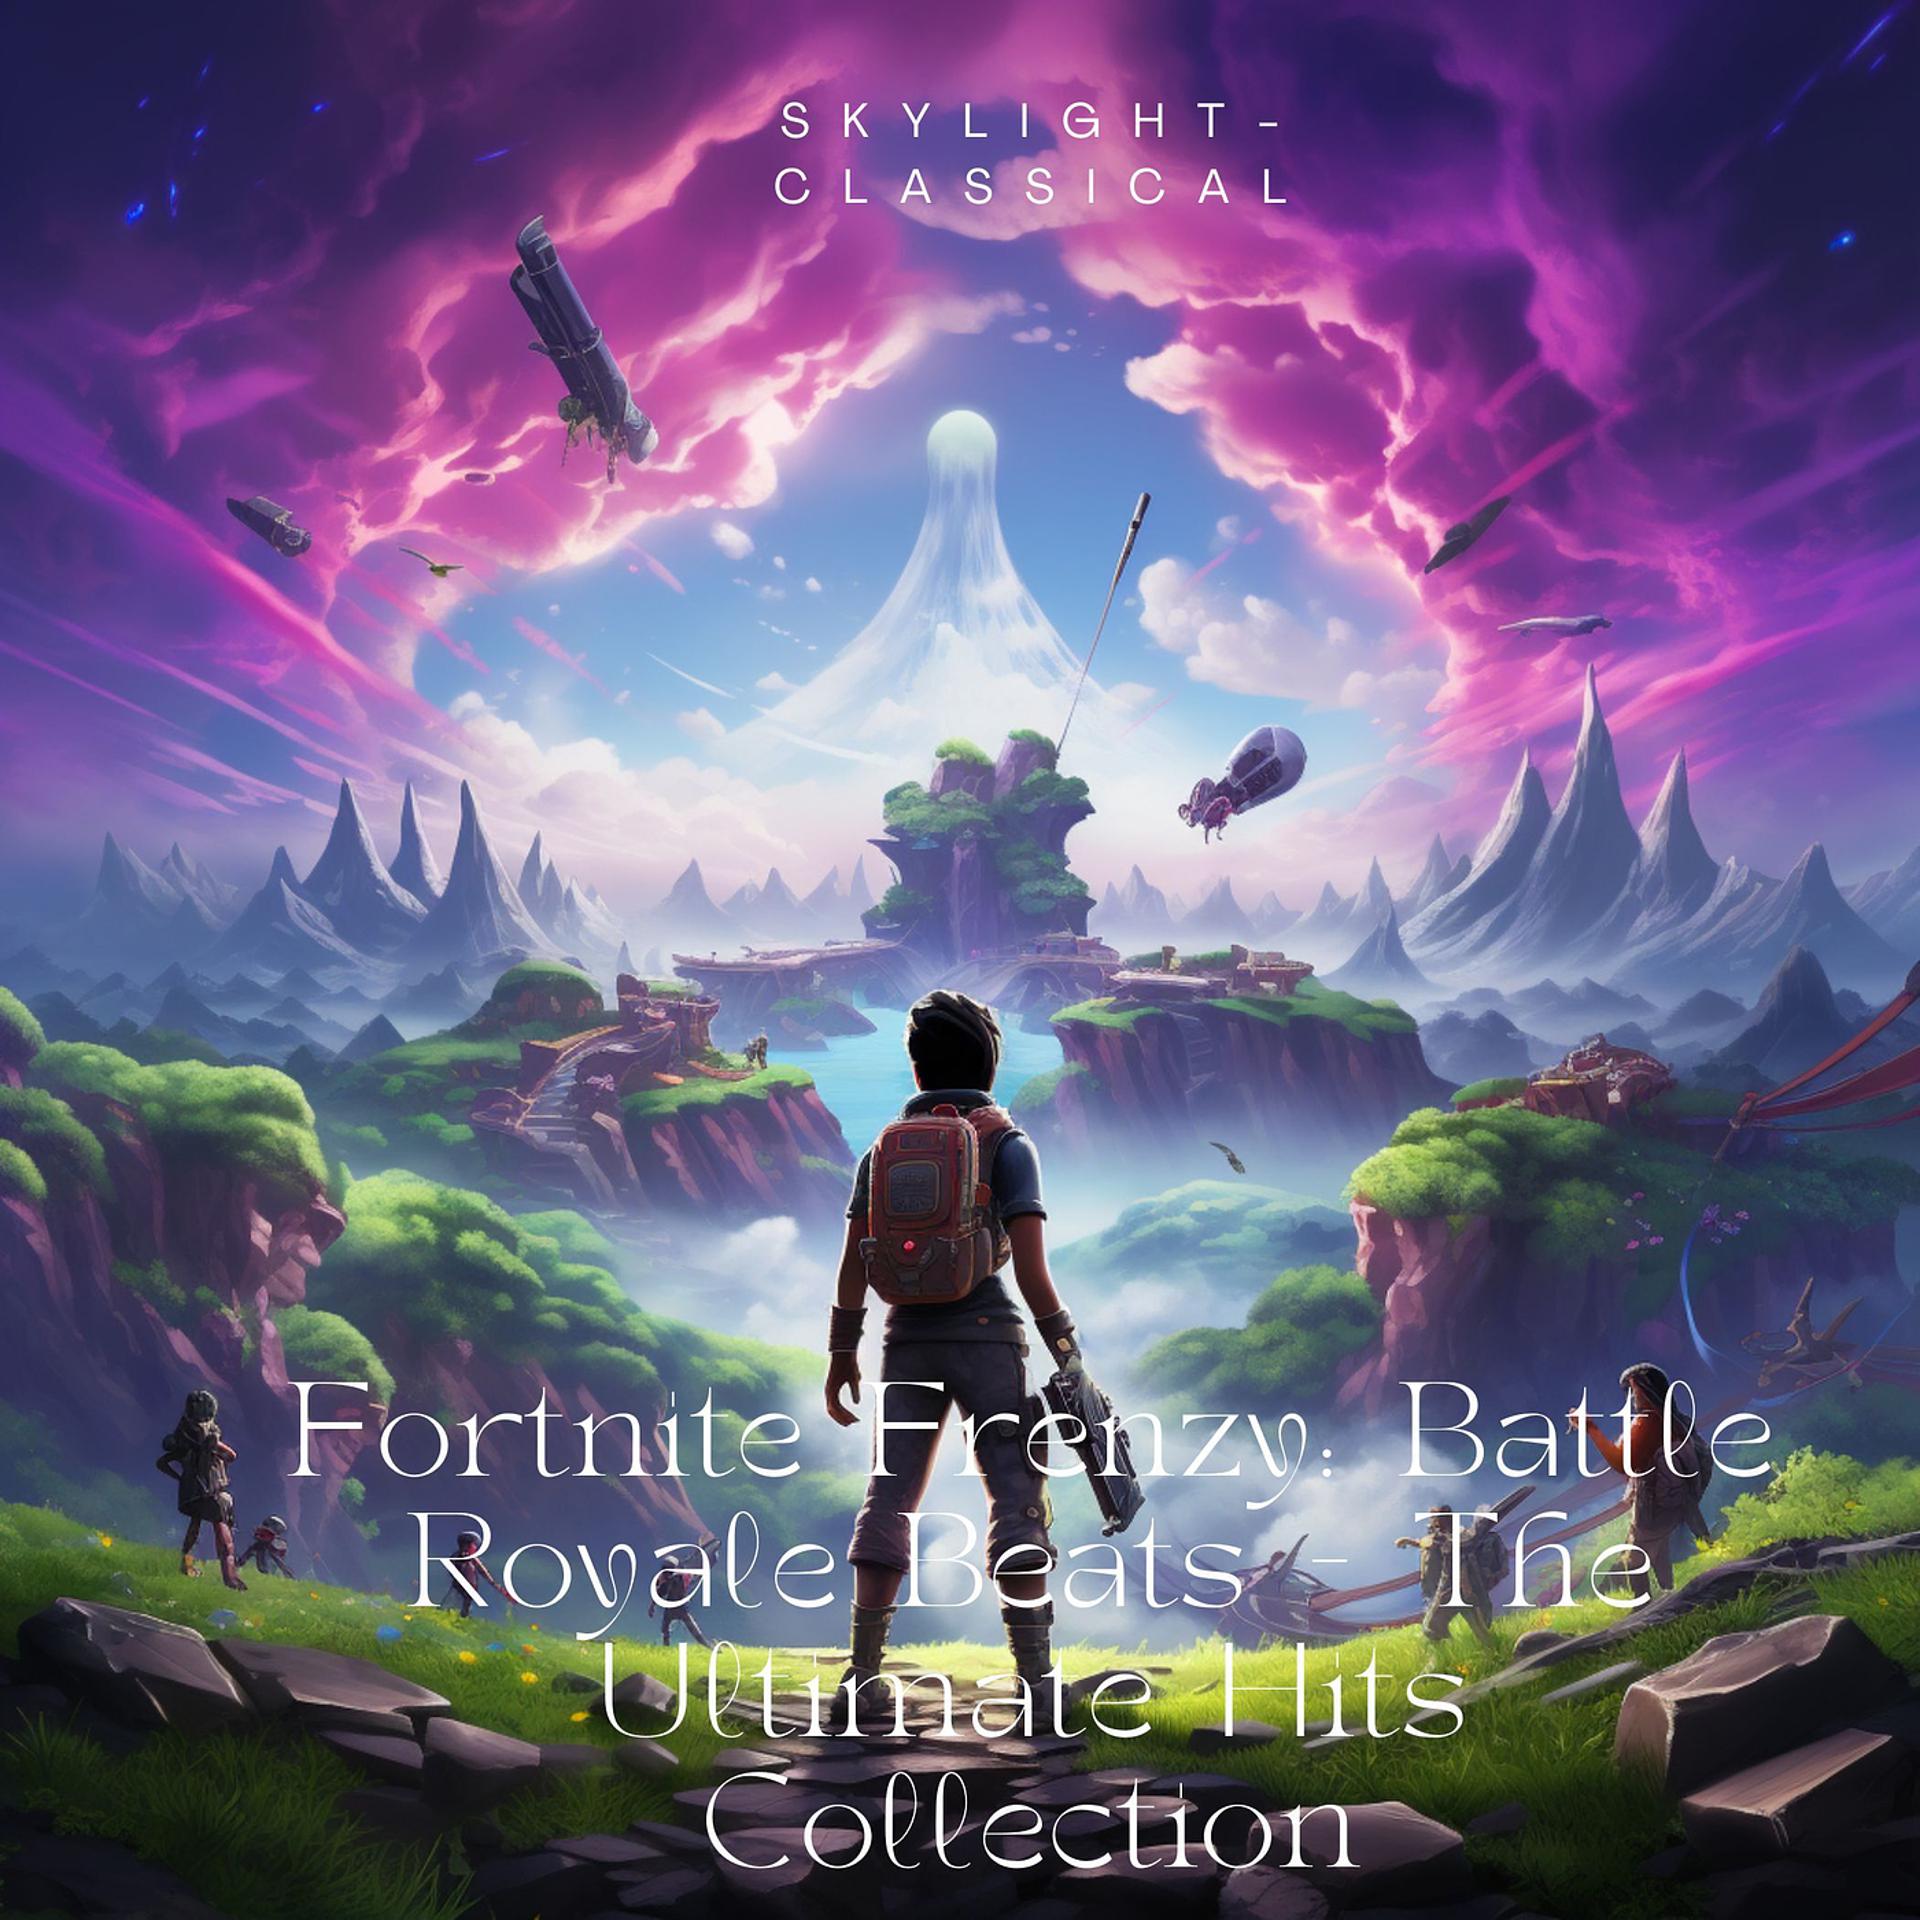 Постер альбома Fortnite Frenzy: Battle Royale Beats - The Ultimate Hits Collection